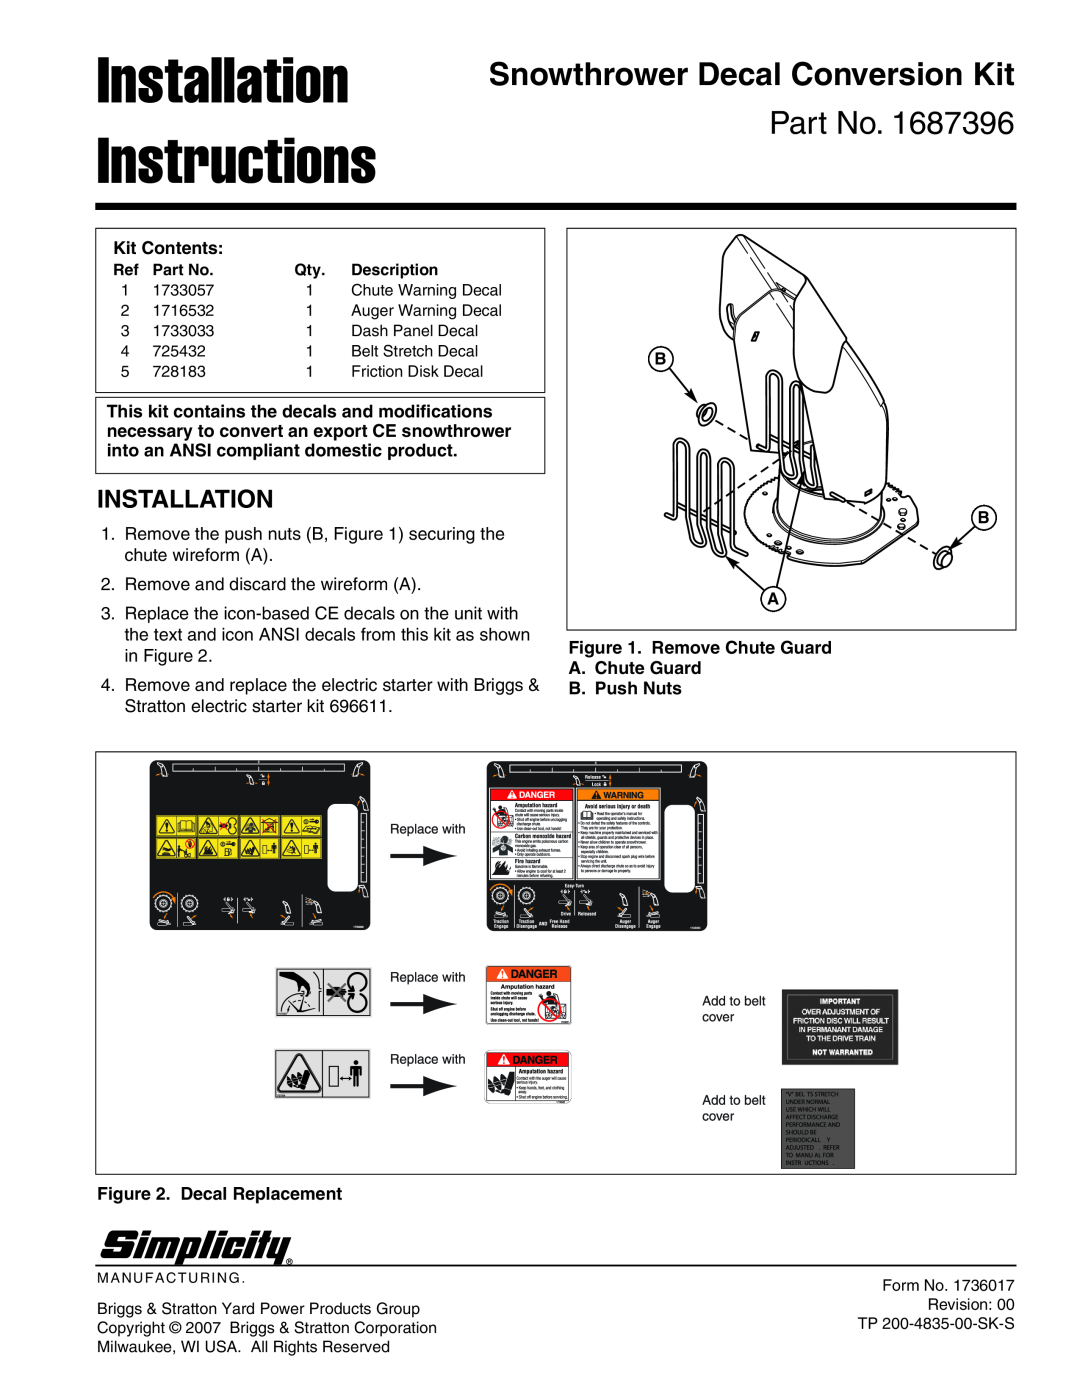 Simplicity 728183 installation instructions Installation Instructions, Snowthrower Decal Conversion Kit, Kit Contents 